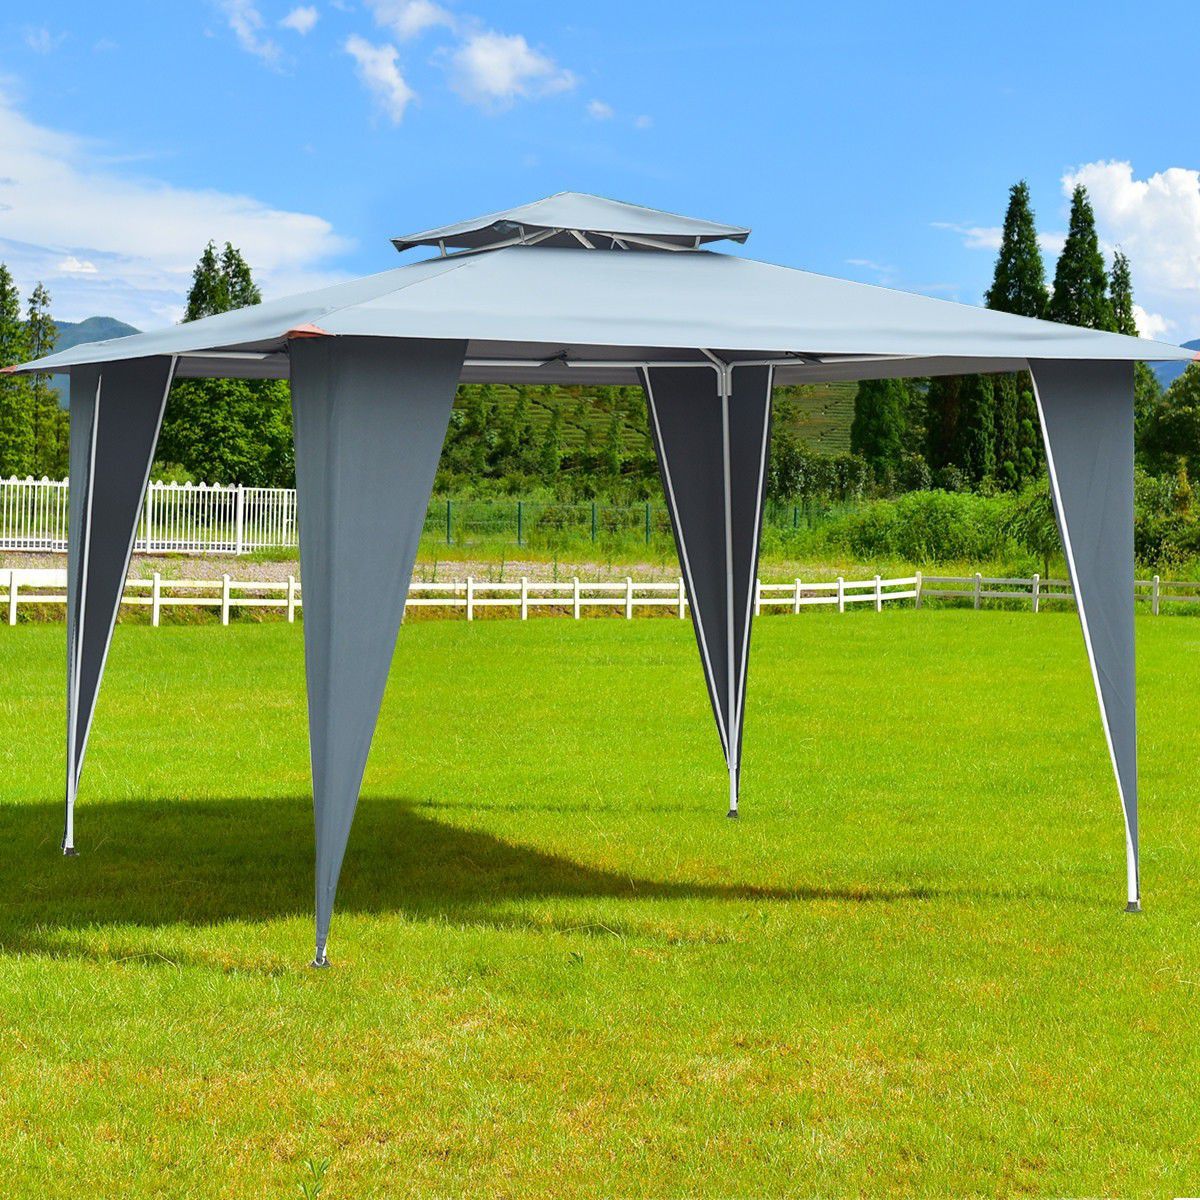 NEW Outdoor Awning Canopy Tent for Wedding Party Beach Picnic Camping